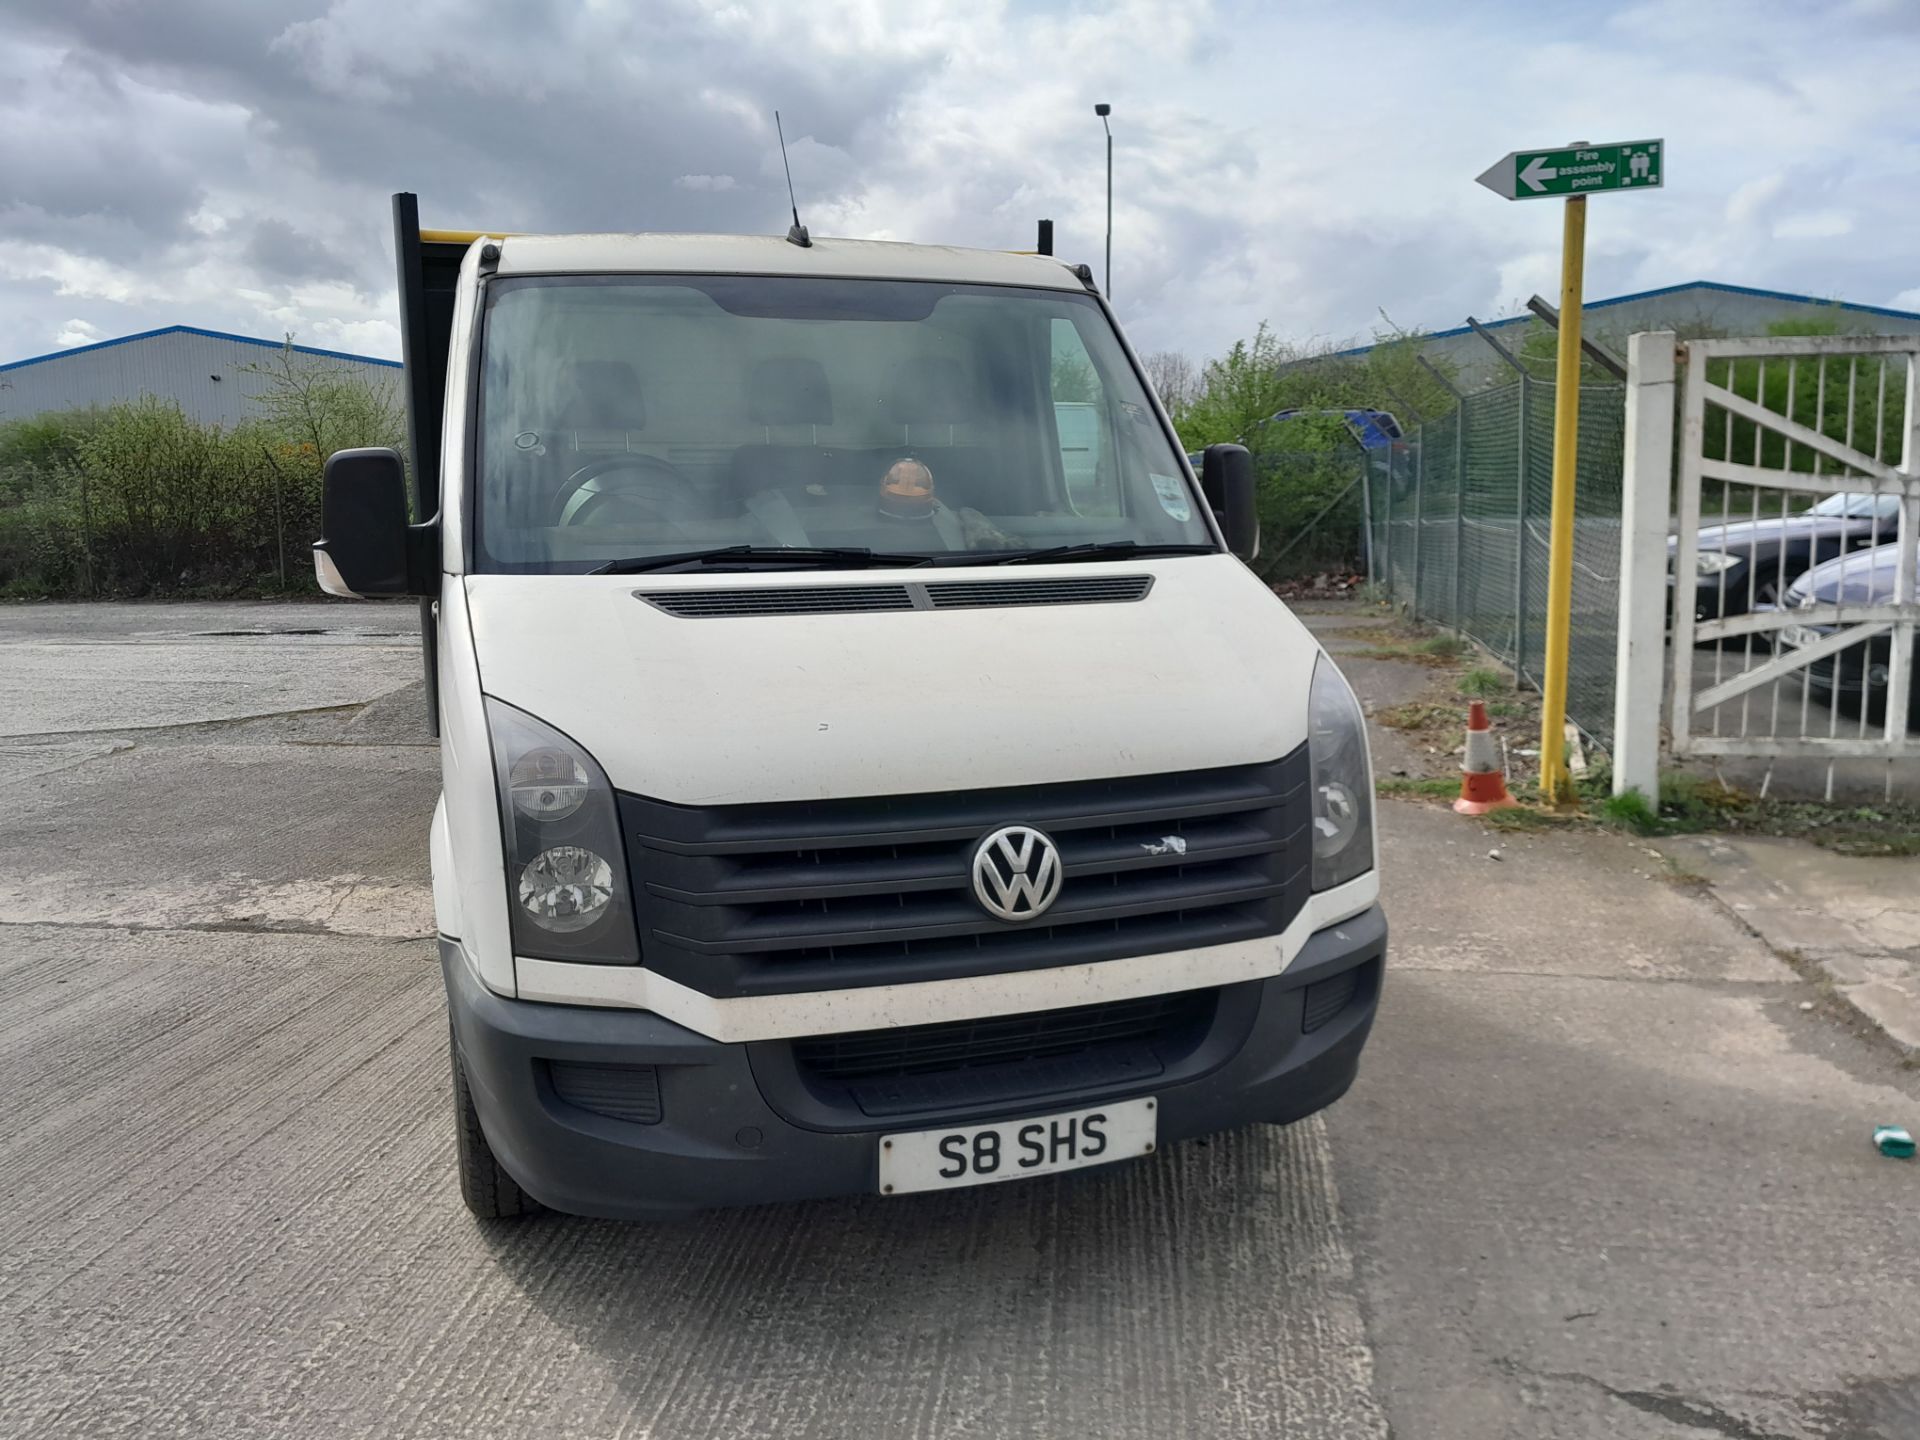 Volkswagen Crafter CR35 LWB 2.0 TDI Double Cab Dropside Van, with Ingimex Dropside body, - Image 2 of 9